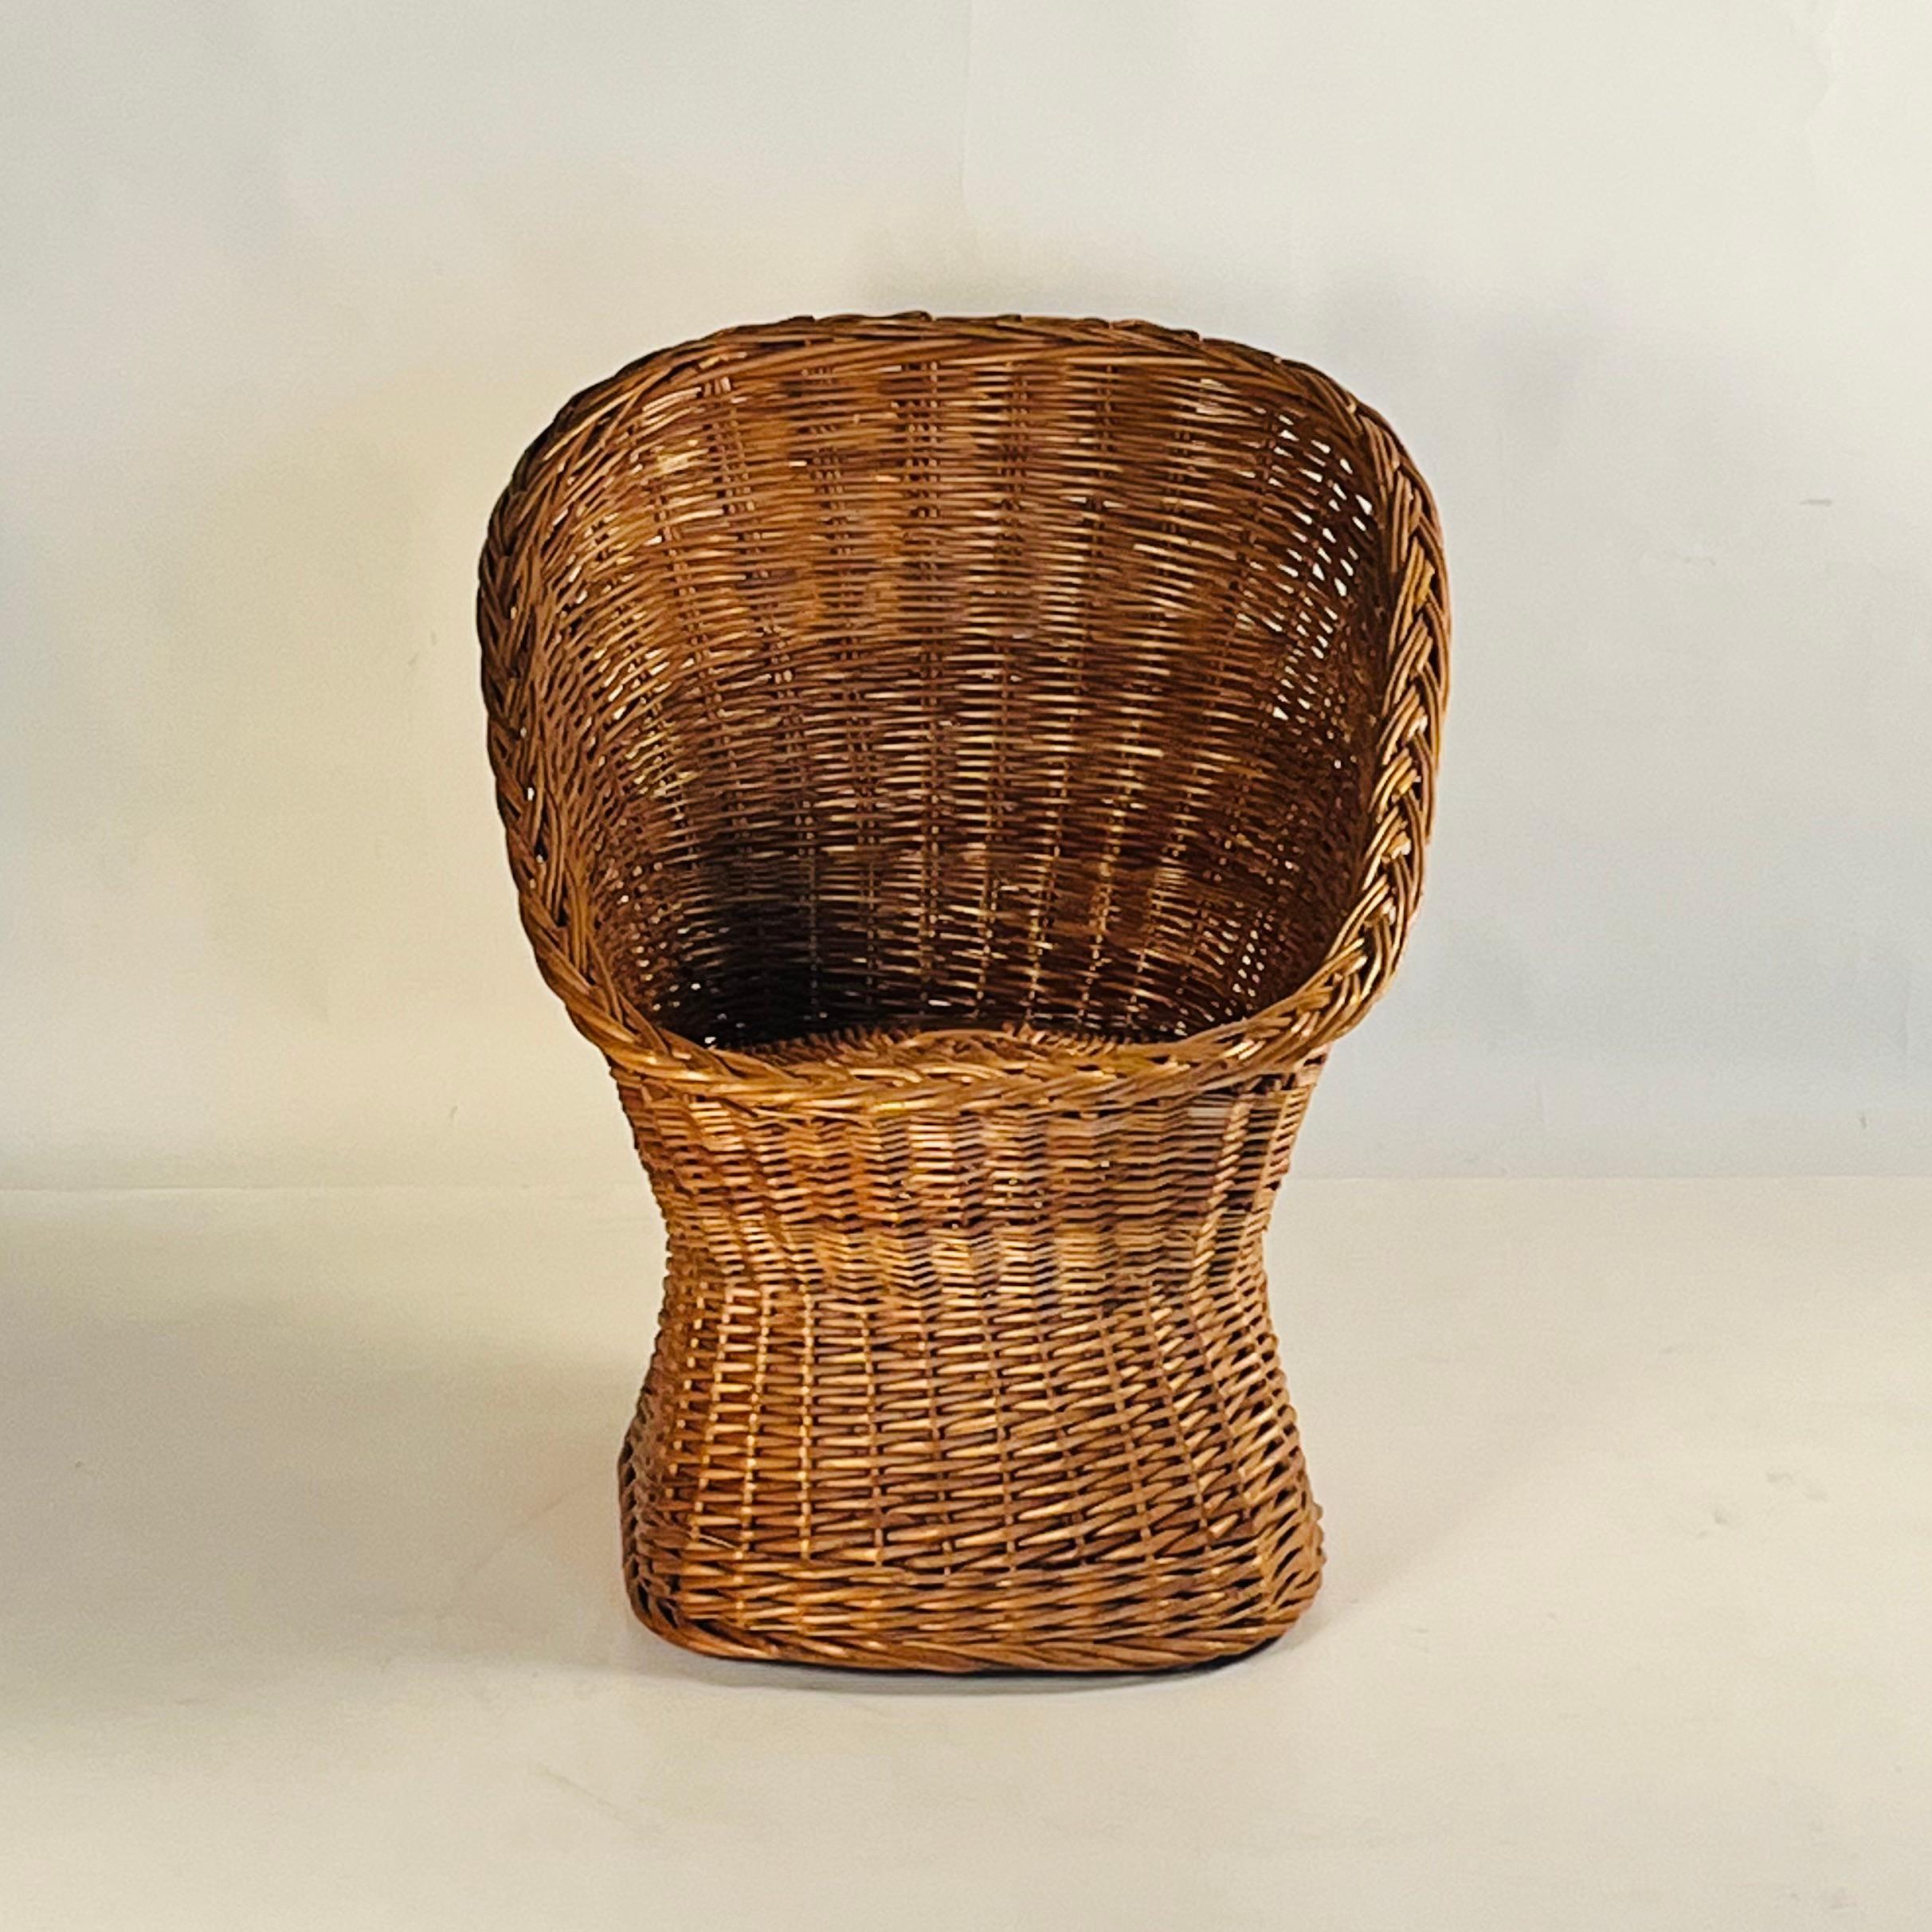 This barrel chair is stylish and comfy. Its lovely honey-colored rattan suits any room. It has a shearling pad for extra luxury and comfort. The chair's unique shape and boho style make it stand out. Made in Yugoslavia, it shows great quality and